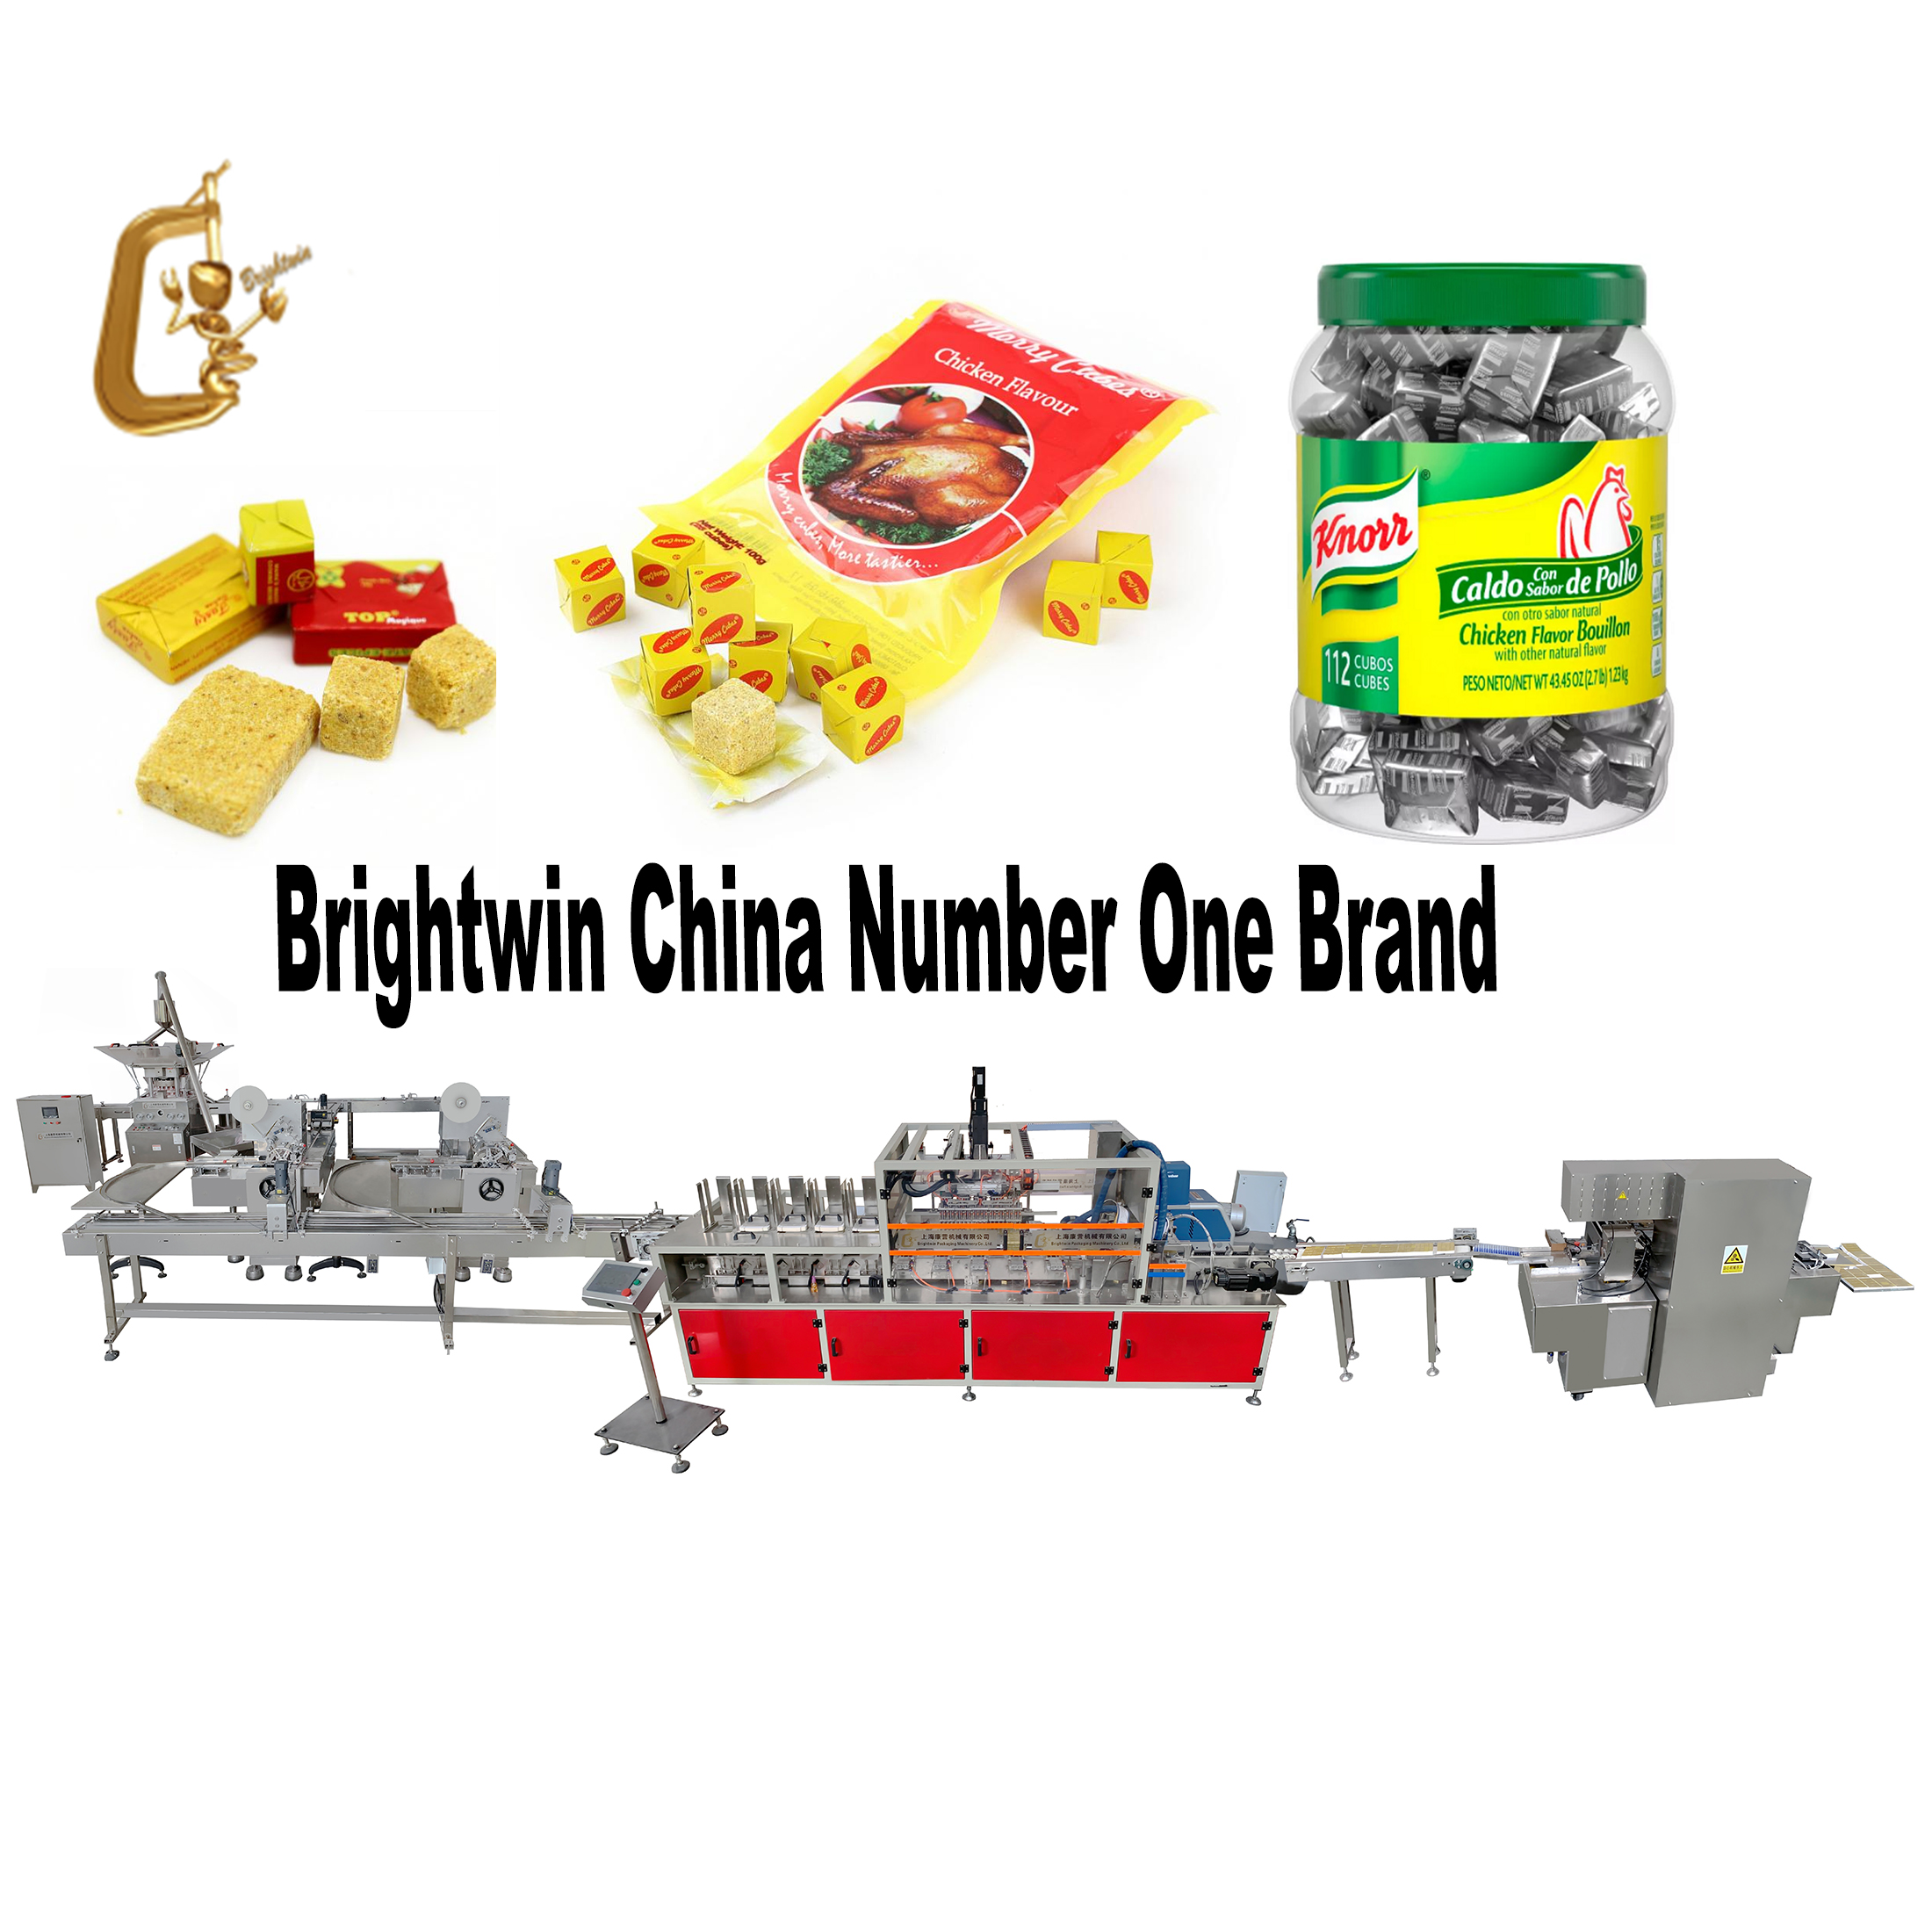 Brightwin Shanghai Brightwin Machinery Beef Flavor Bouillon Seasoning Cube Soup Cubes 4g 10g 12g Pressing Wrapping Boxing Packing Machine Featured Image